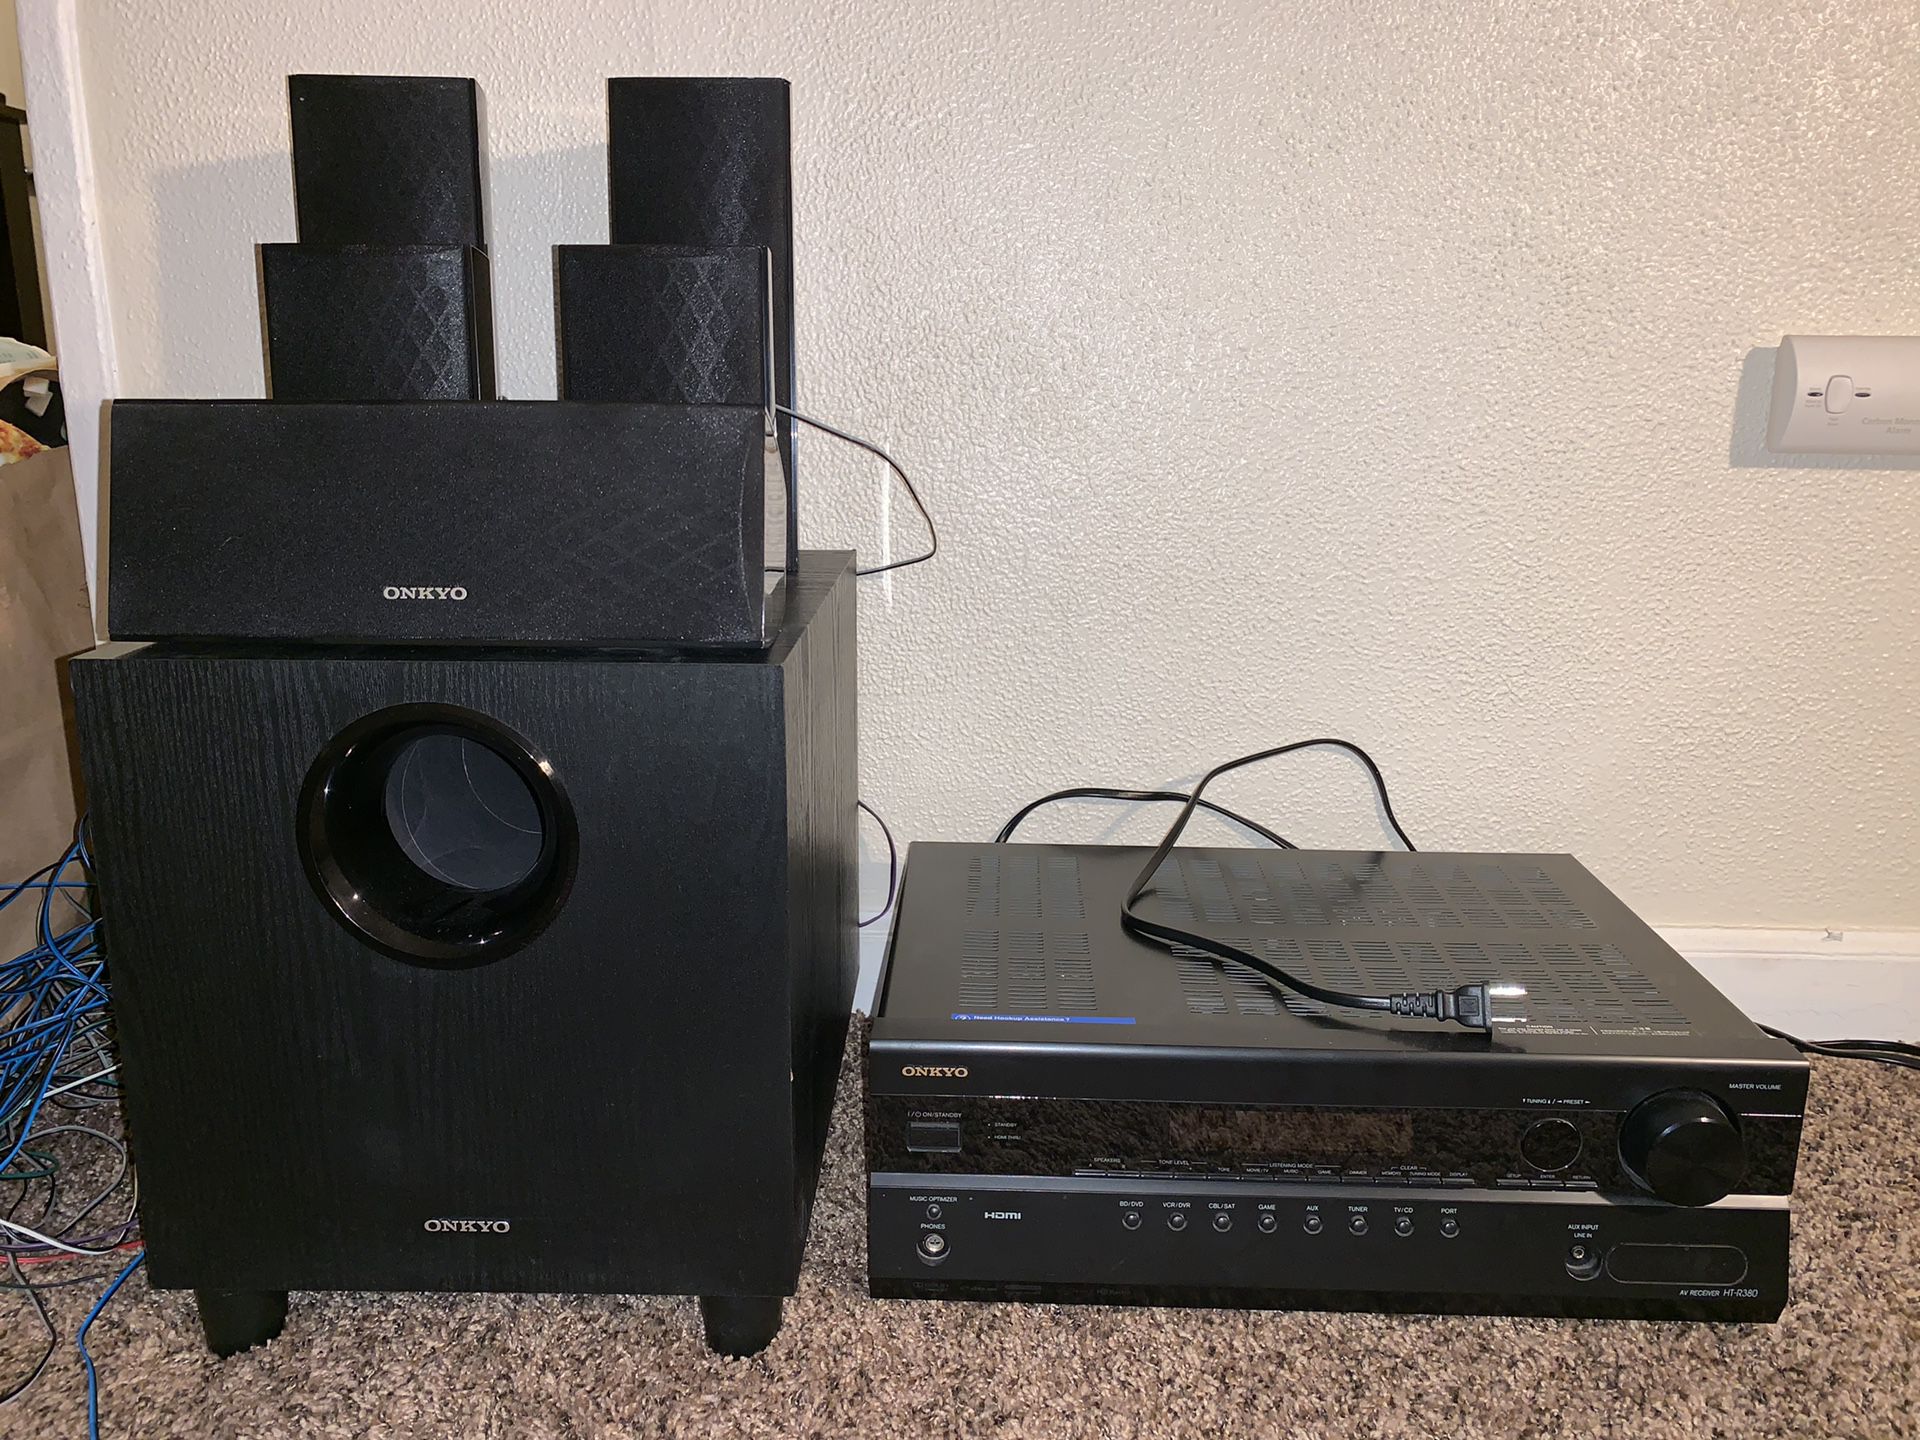 Onkyo HT-R380 Receiver and 5.1 channel surround system